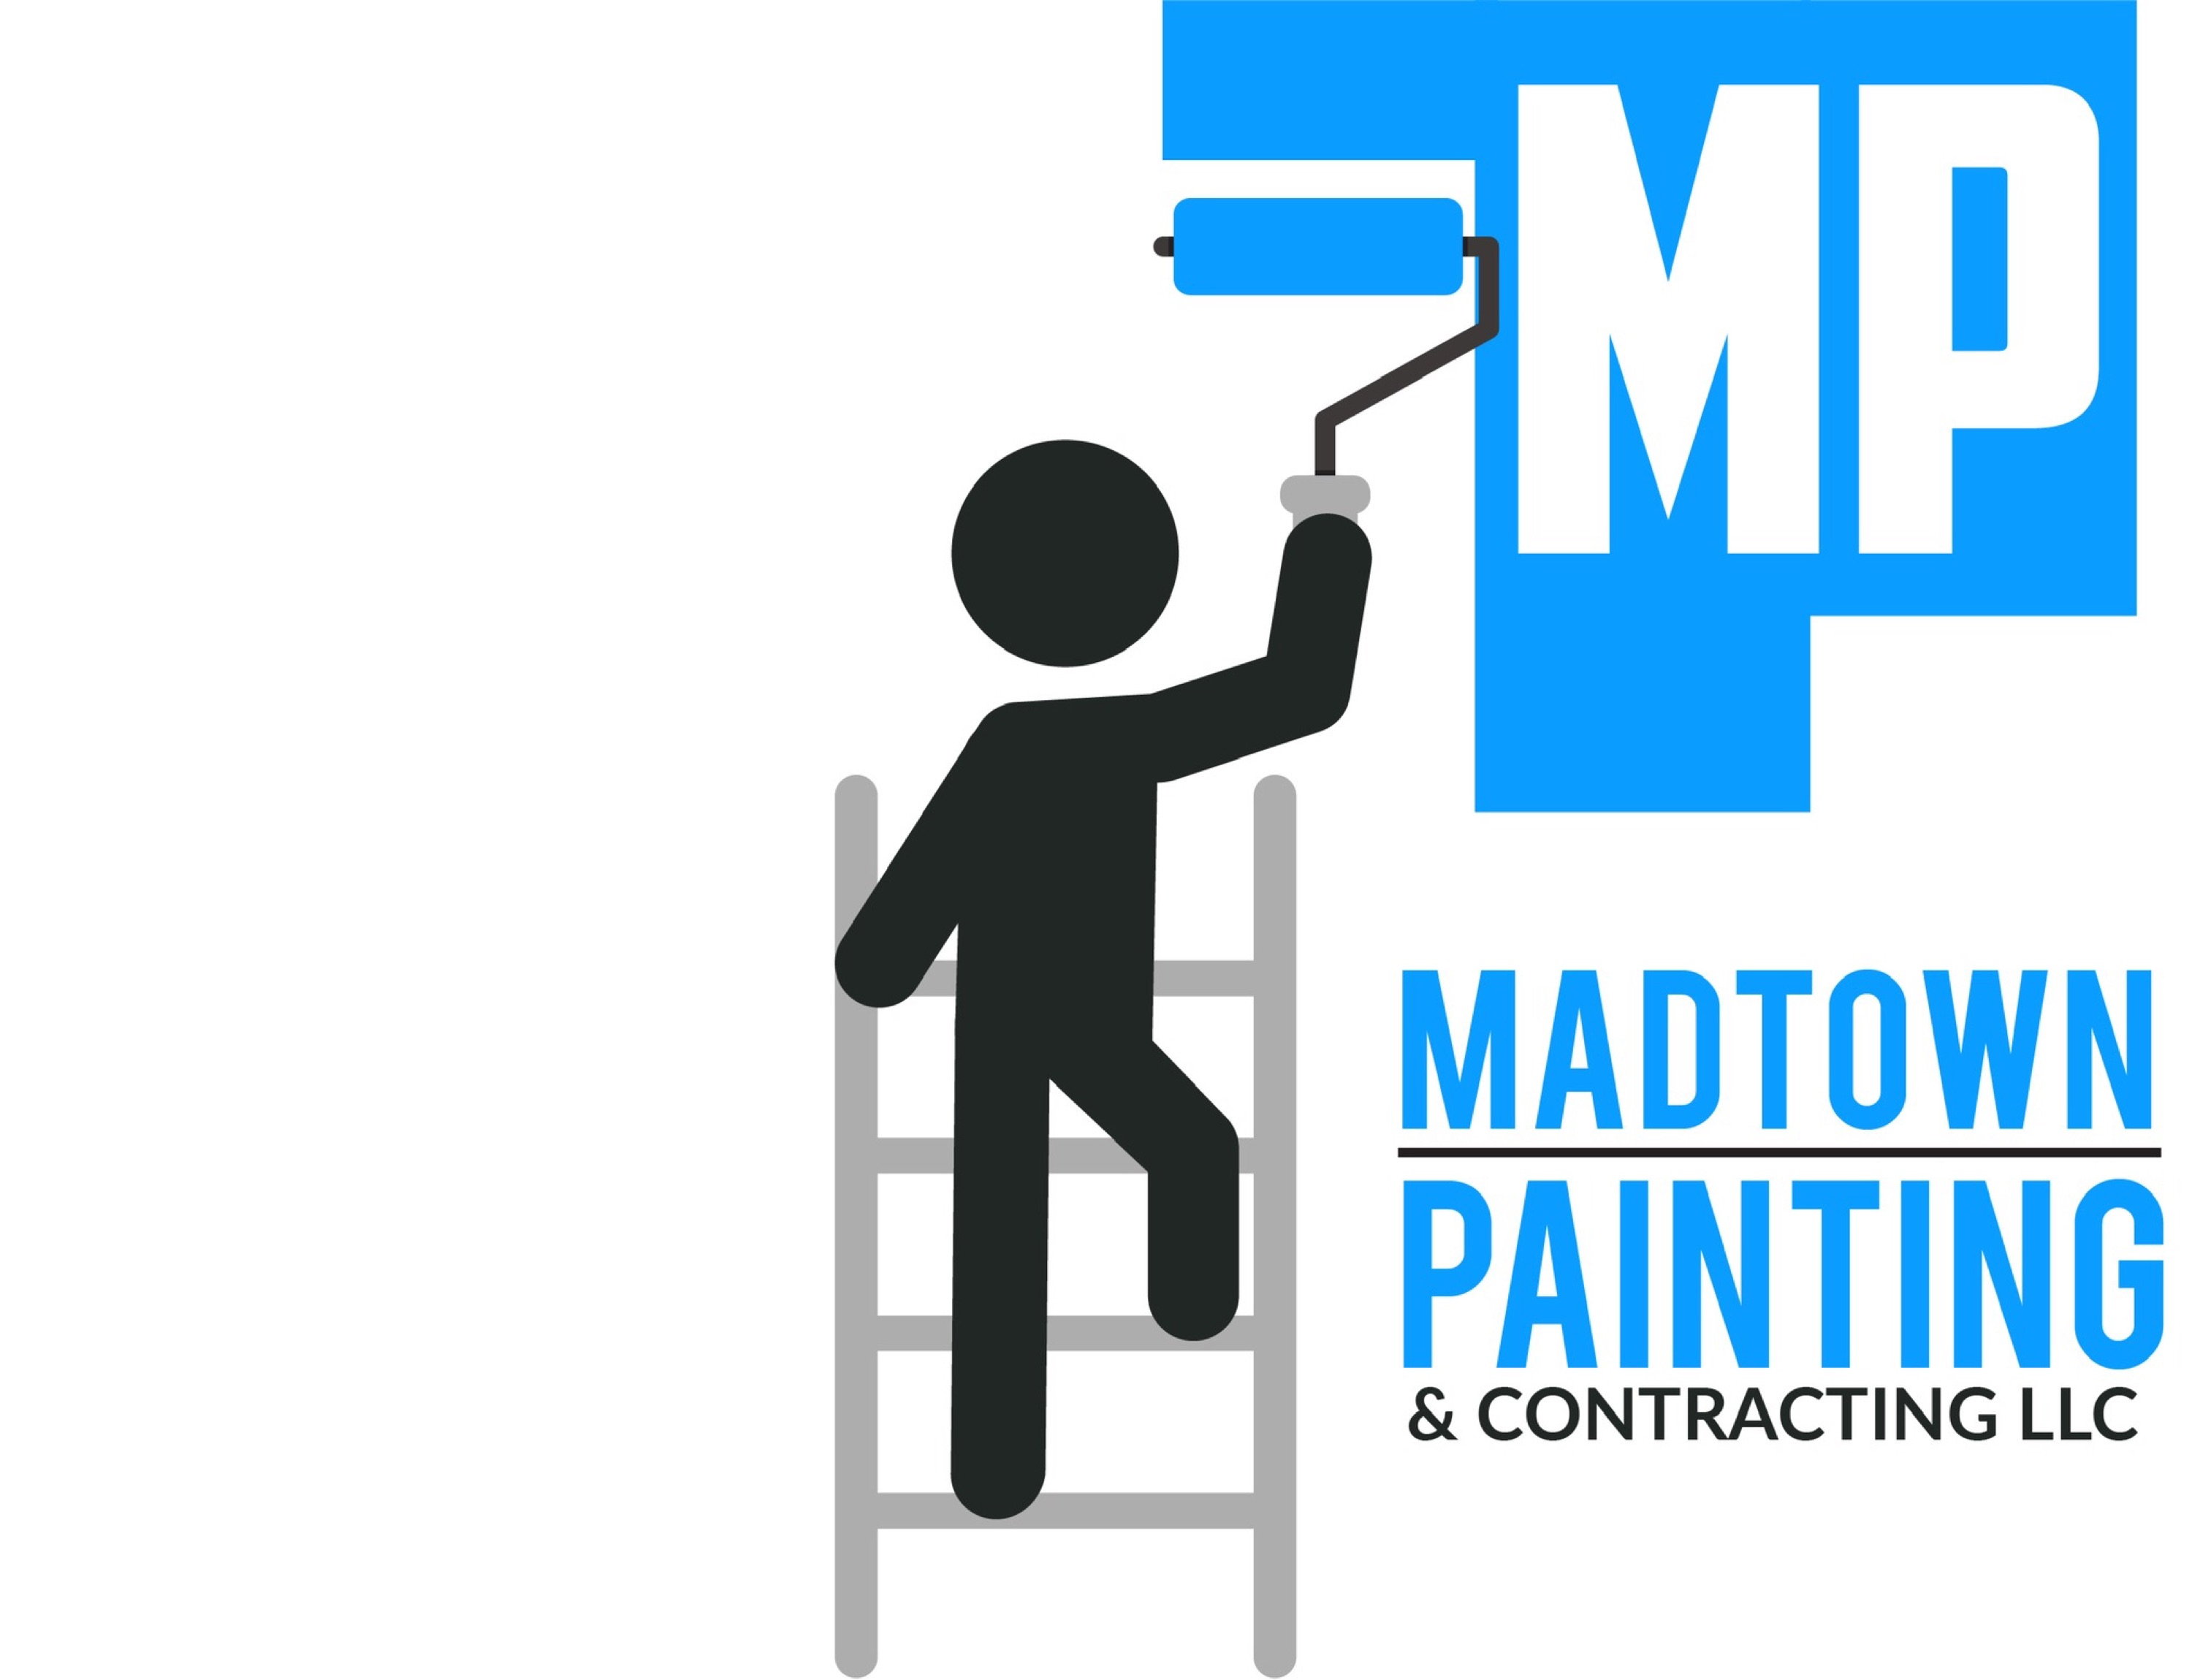 MadTown Painting & Contracting LLC Logo